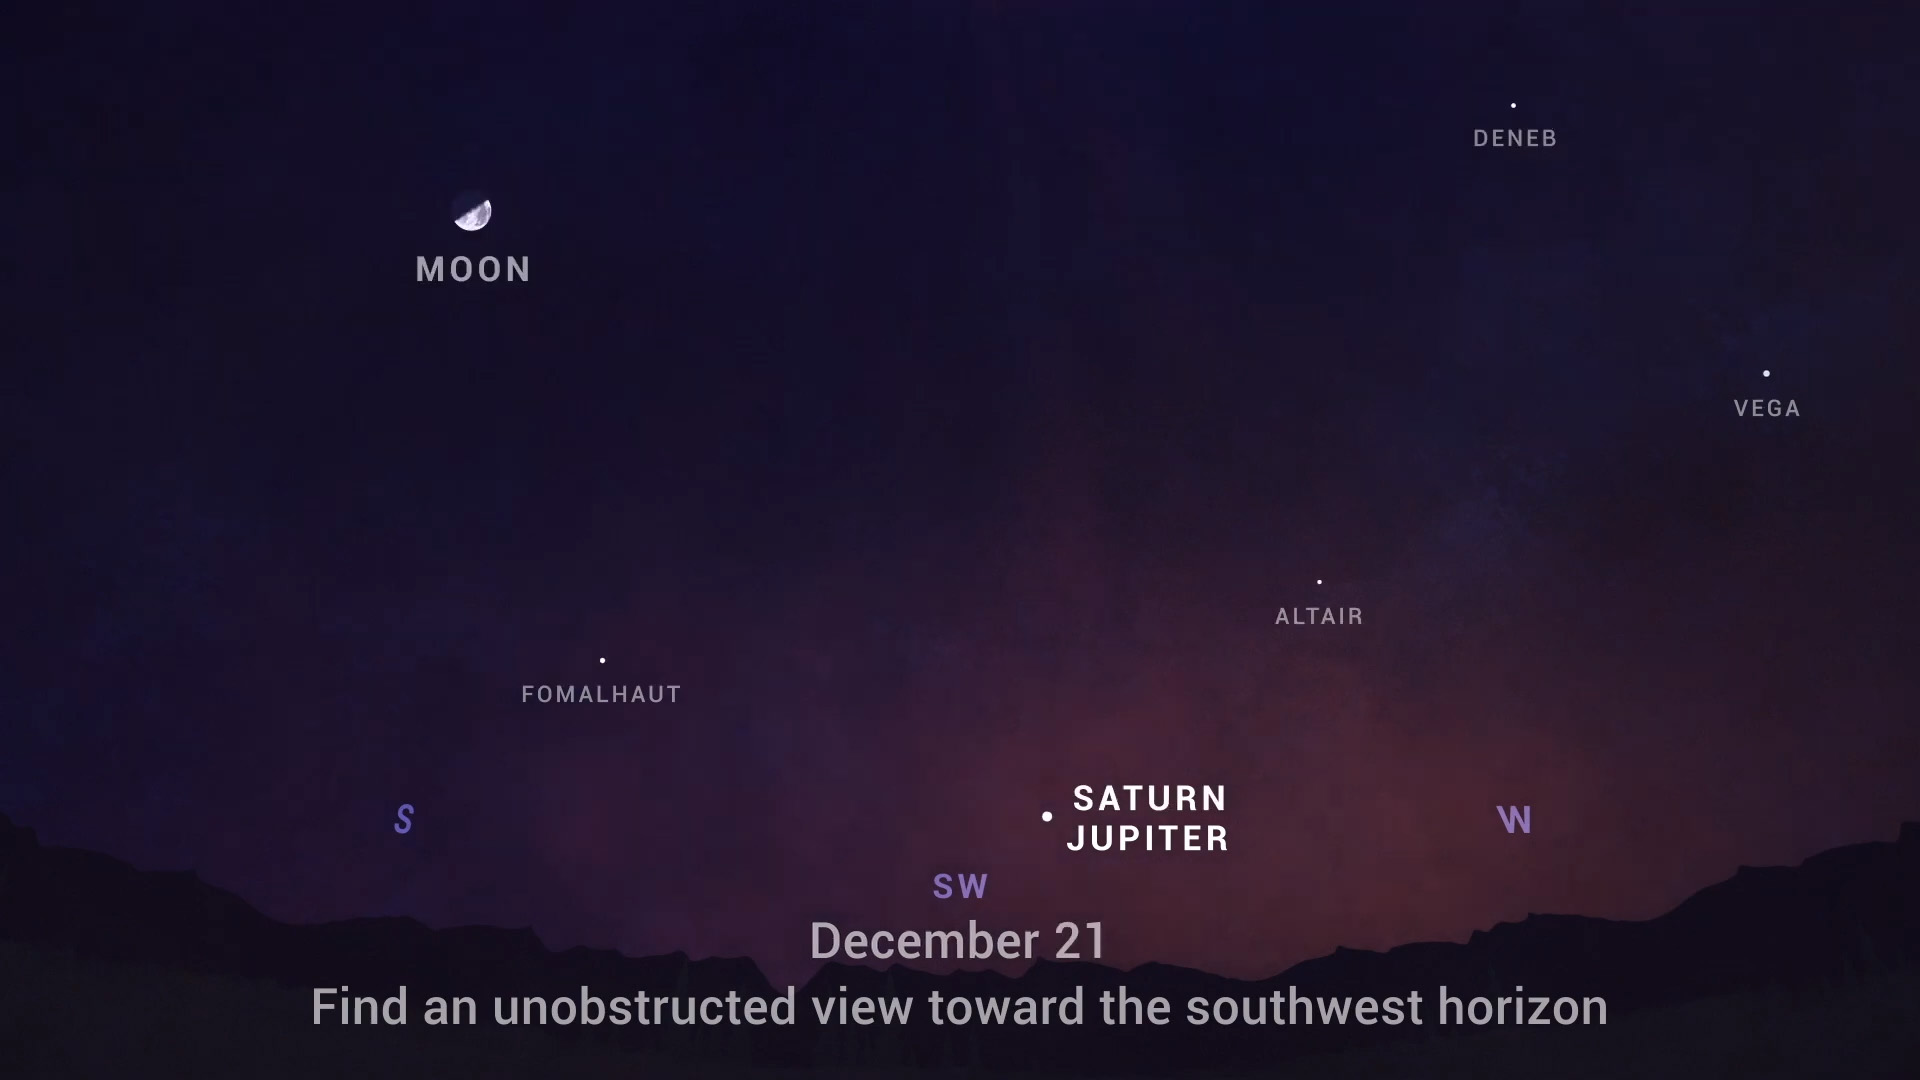 a star map showing the location along the southwestern horizon of the moon, deneb, fomalhaut, saturn and jupiter, altair, vega, and deneb